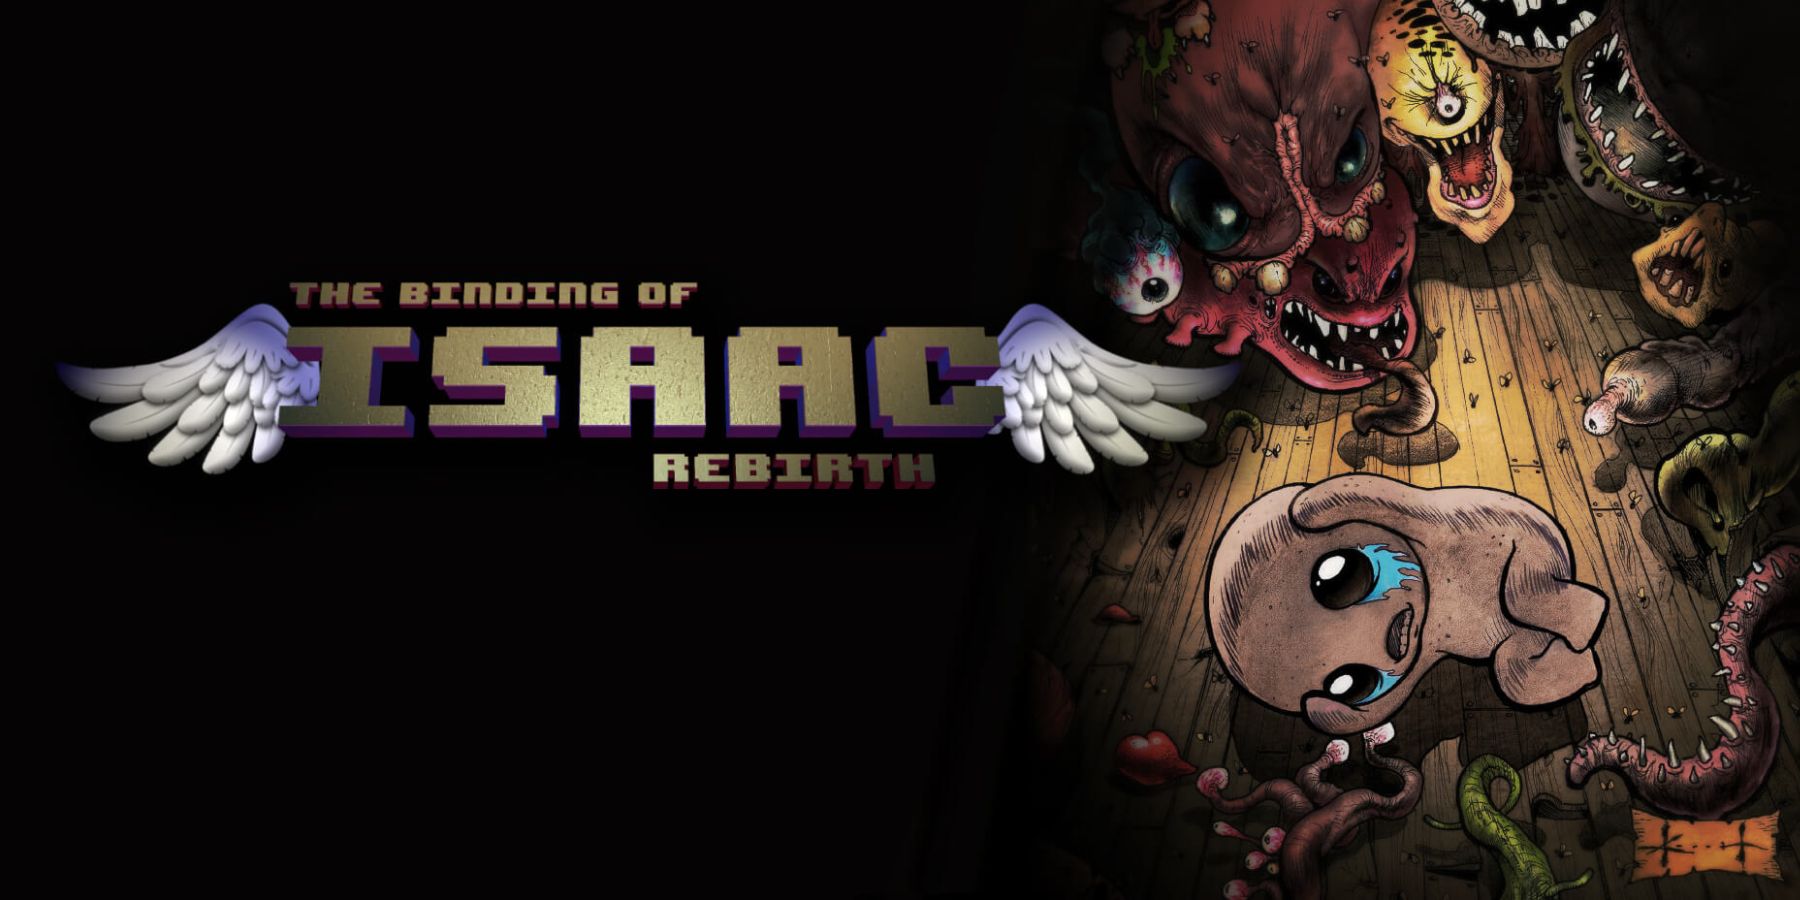 Cover art of The Binding of Isaac Rebirth